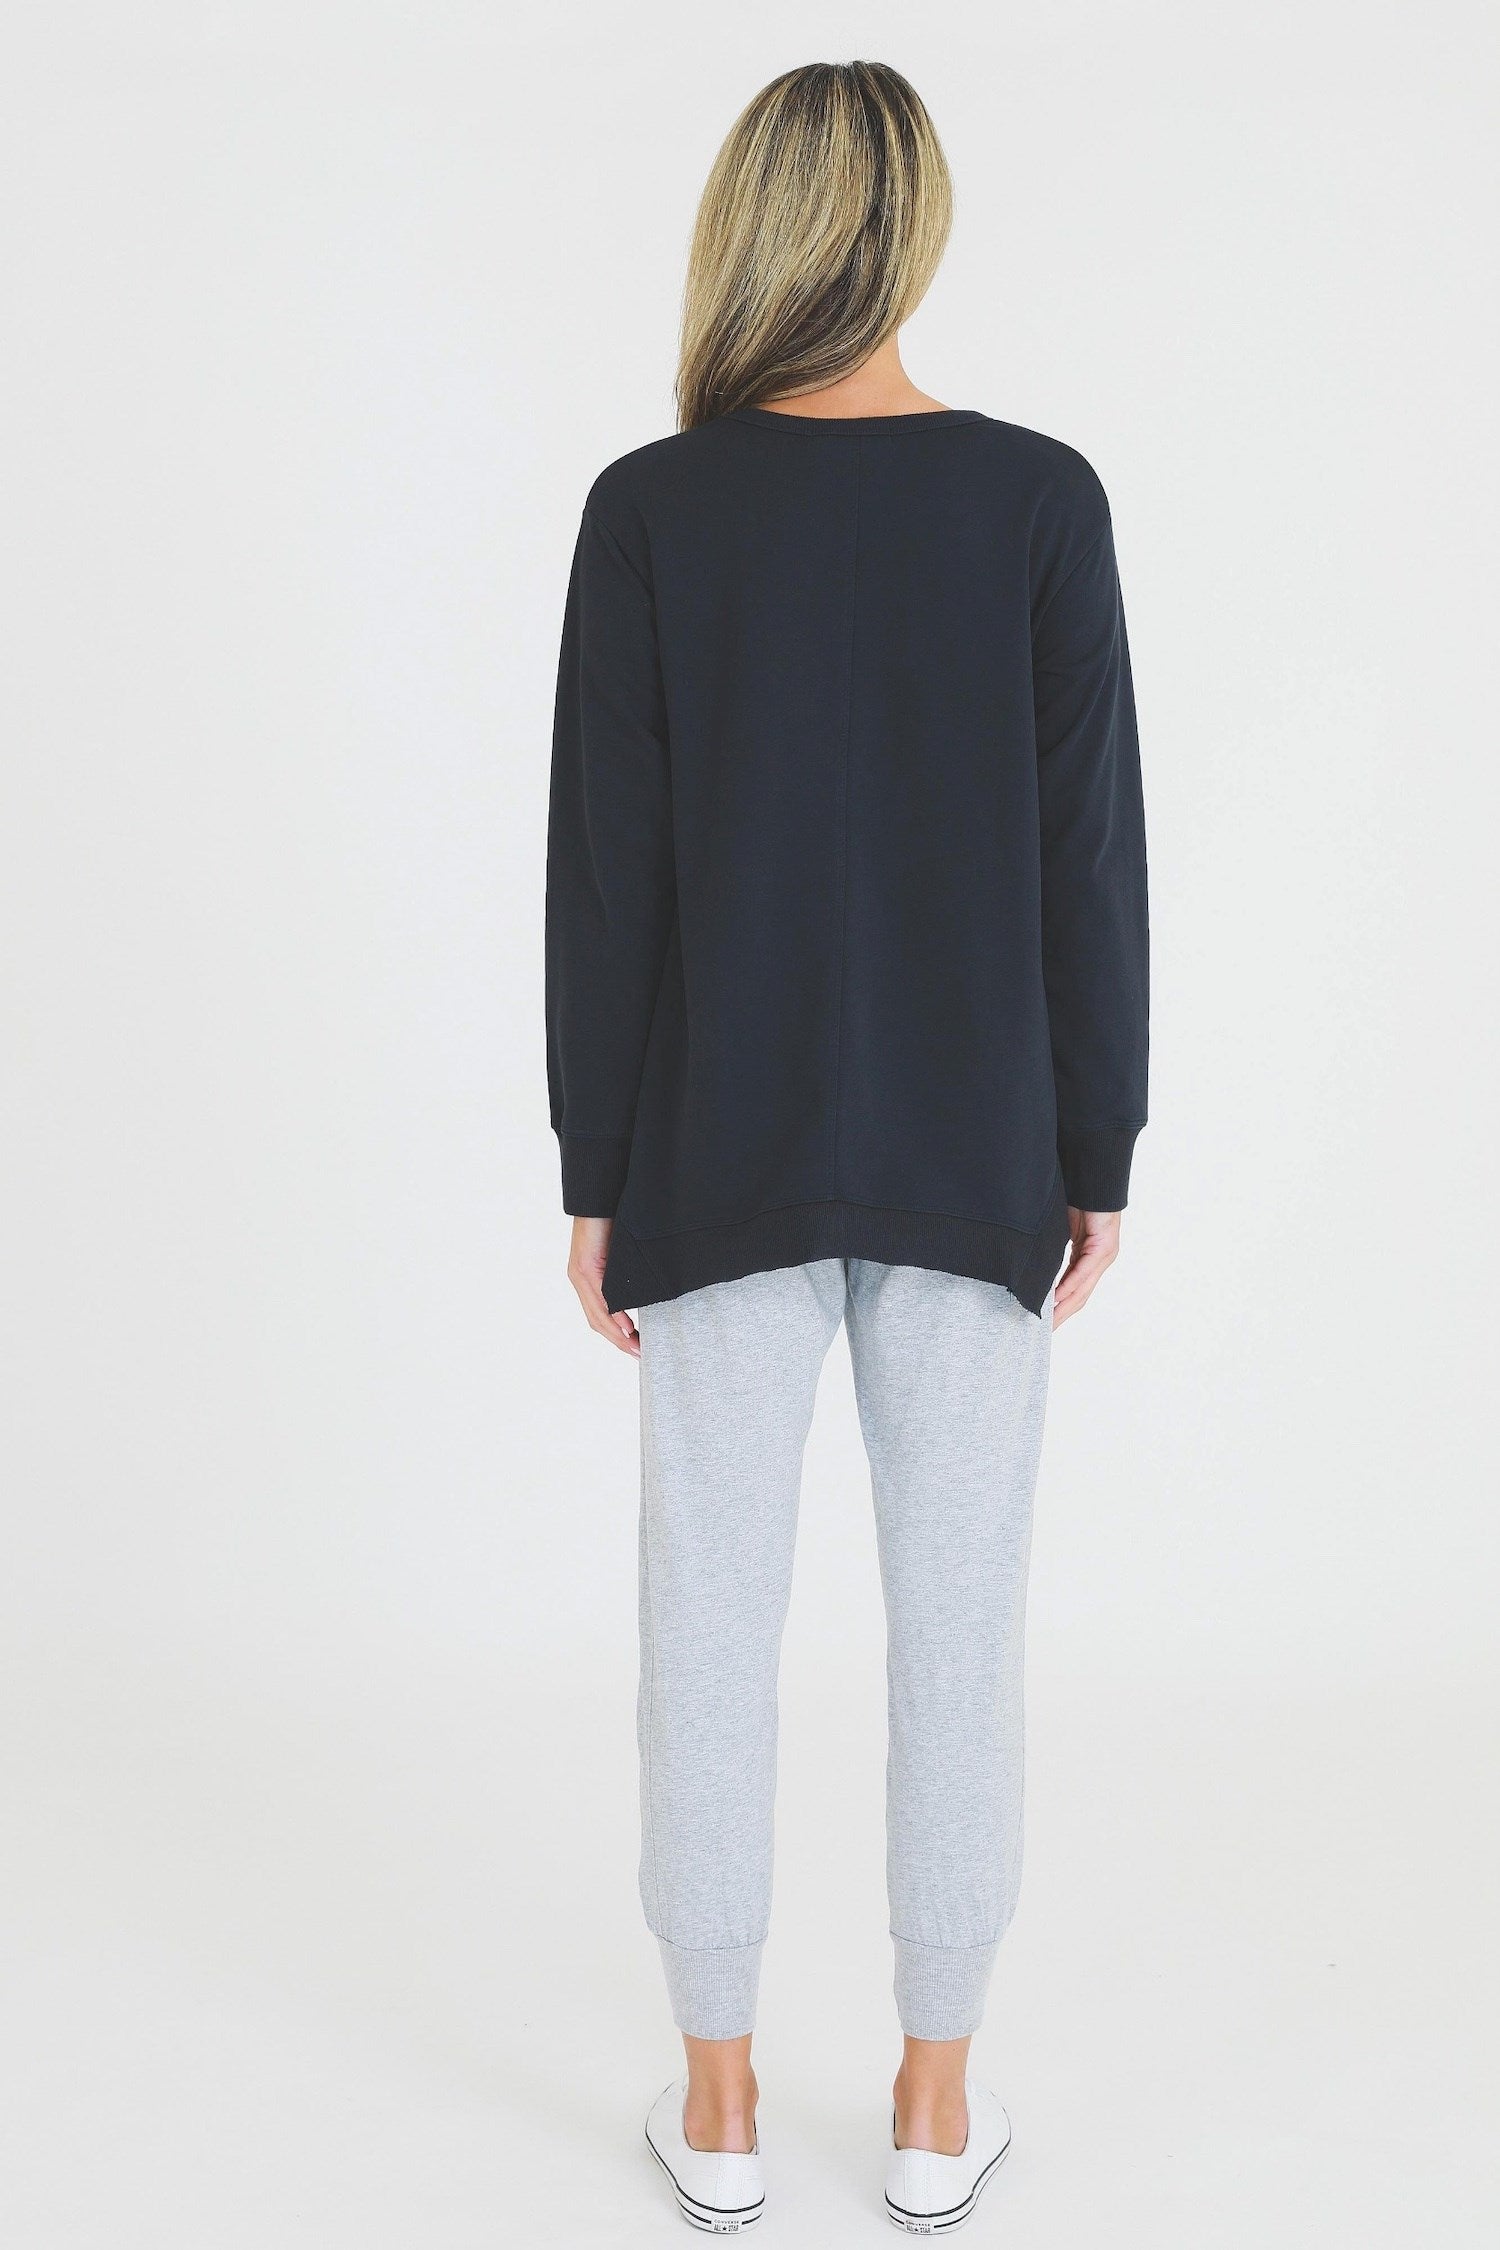 navy long sleeve top #color_ink